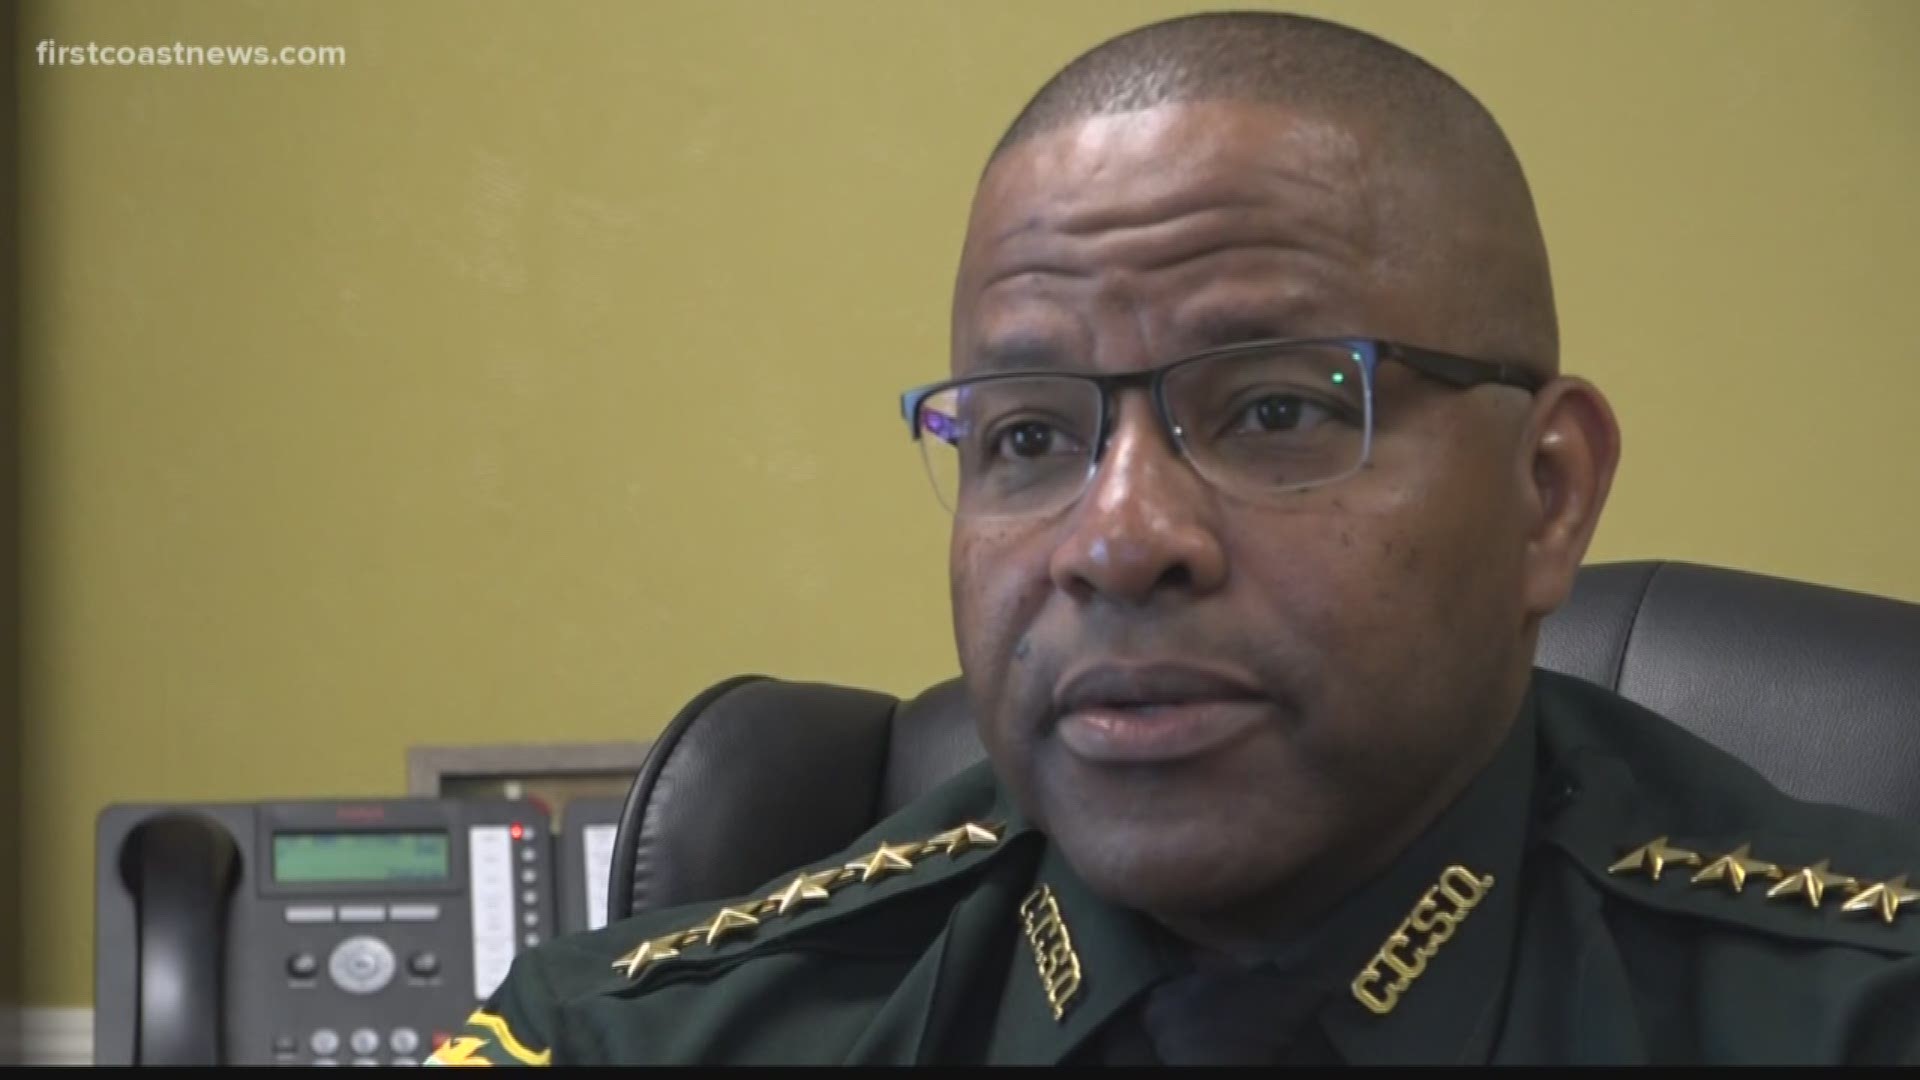 A letter to Florida Governor Ron DeSantis that claims to be on behalf of the men and women of the Clay County Sheriff's Office expresses concern about Sheriff Darryl Daniels' state of mind and asks that he be replaced pending an investigation by the Florida Department of Law Enforcement.